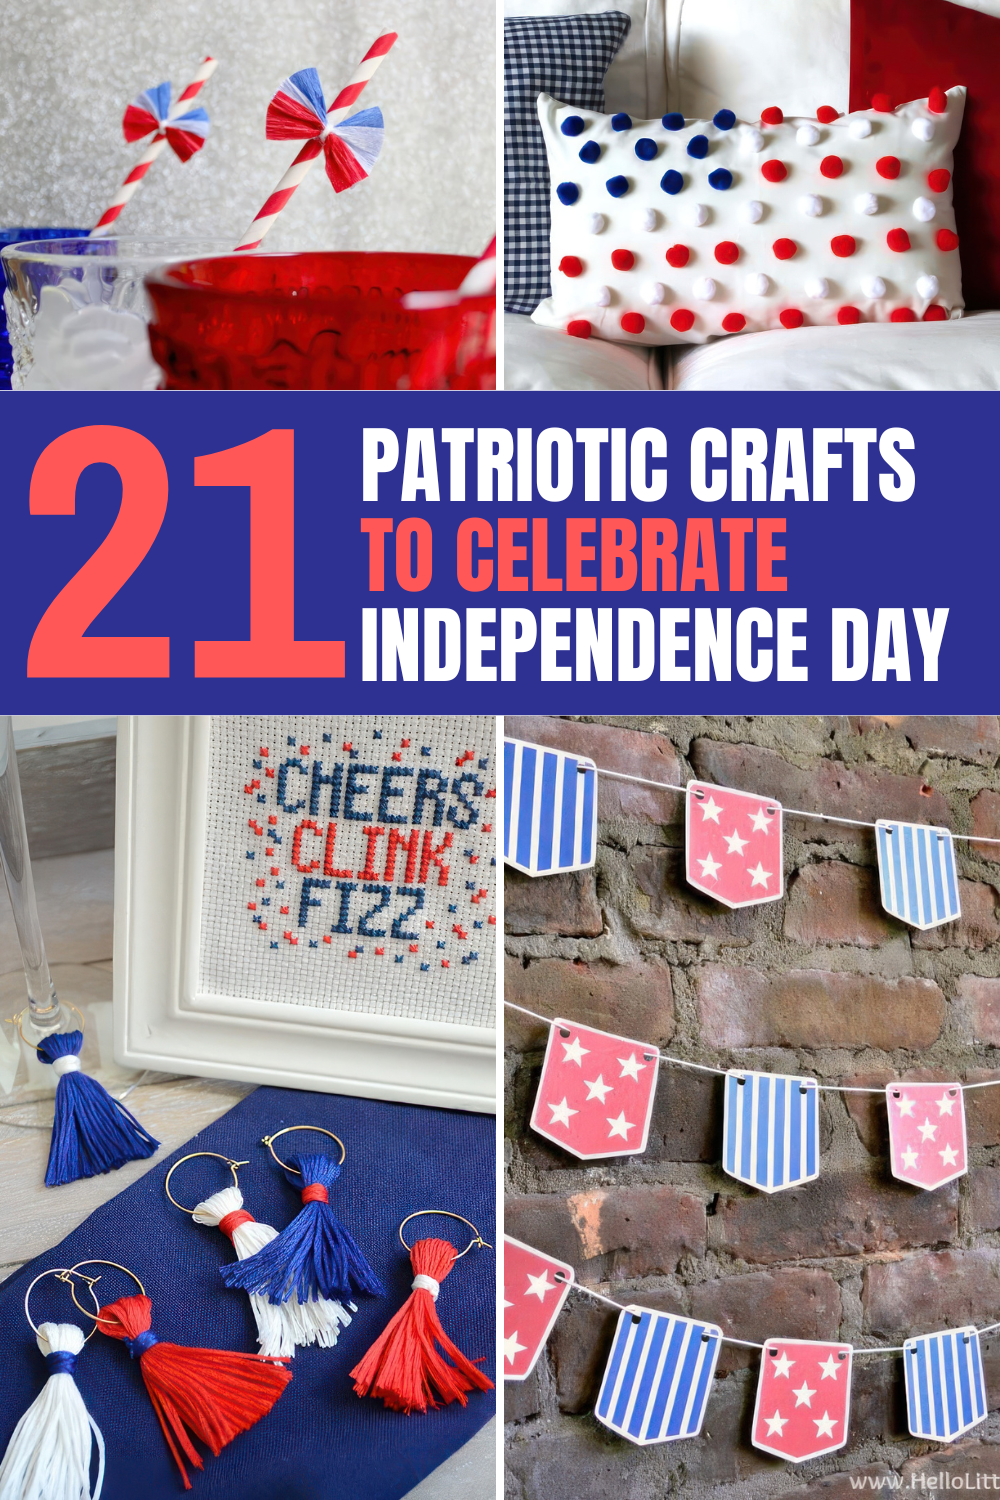 Transform your 4th of July celebrations with these beautiful crafts! Perfect for adults, these red, white, and blue projects are ideal for home decor and party decorations. Tap to see all the gorgeous crafts! 🎆🖌️

